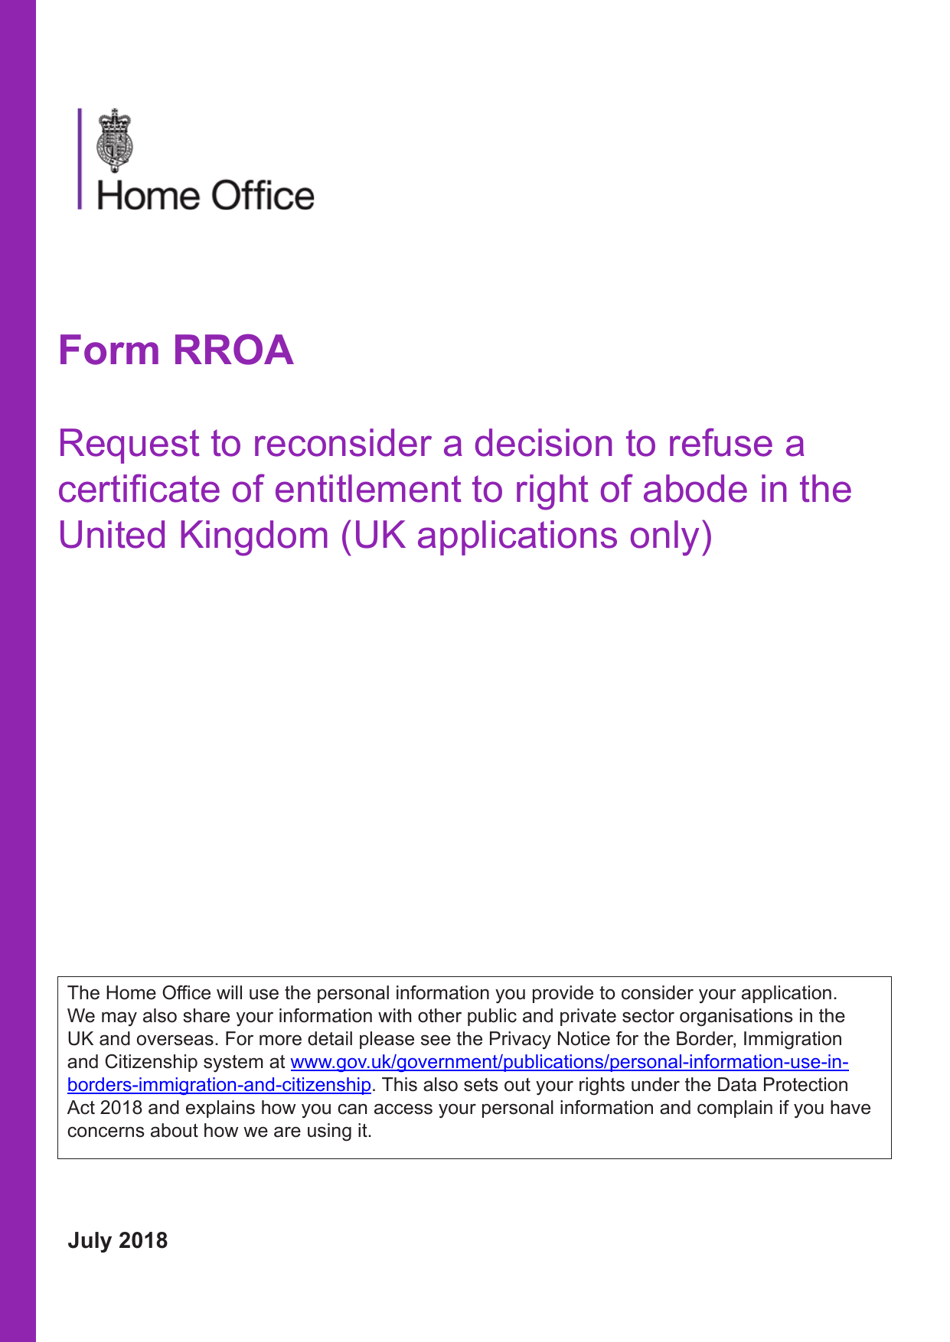 Form RROA Application to Reconsider a Decision for a Certificate of Entitlement to the Right of Abode in the United Kingdom - United Kingdom, Page 1